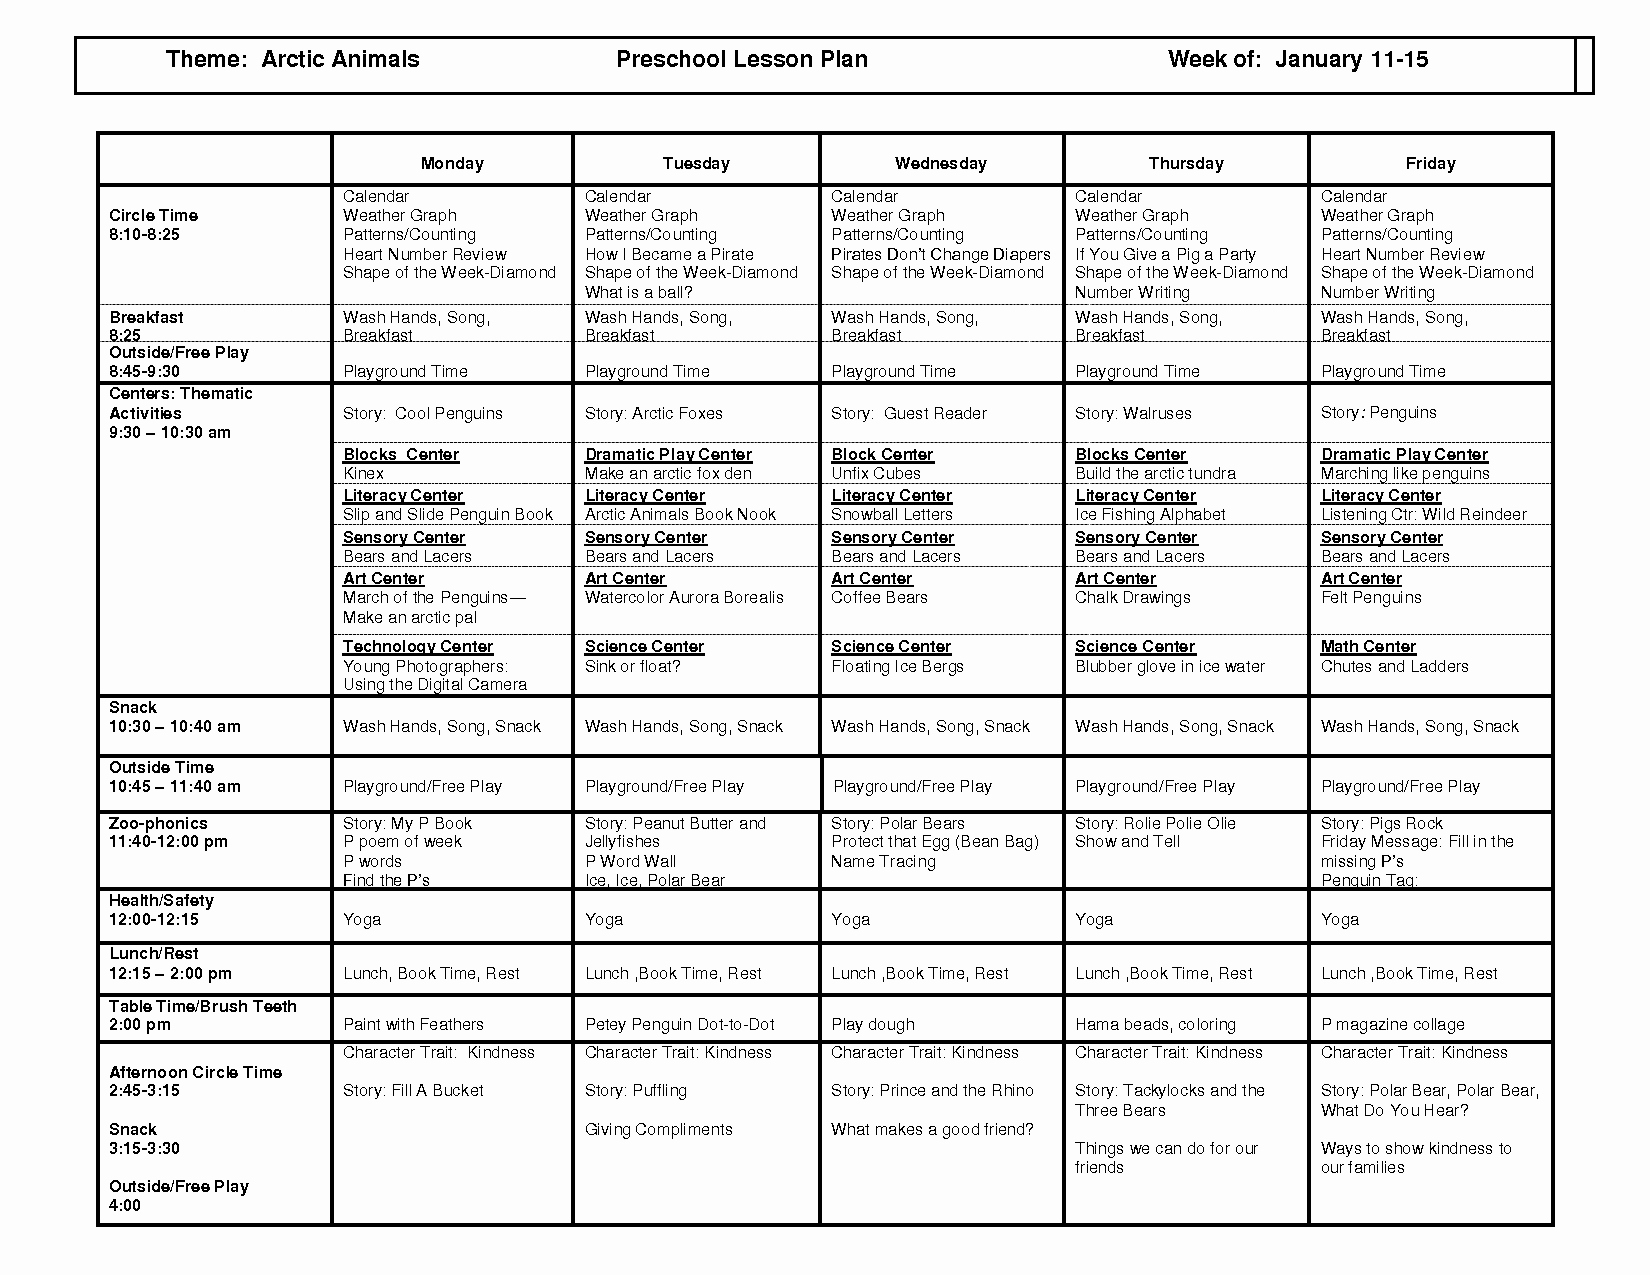 Weekly Lesson Plan Template Beautiful Free Weekly Lesson Plan Template and Teacher Resources